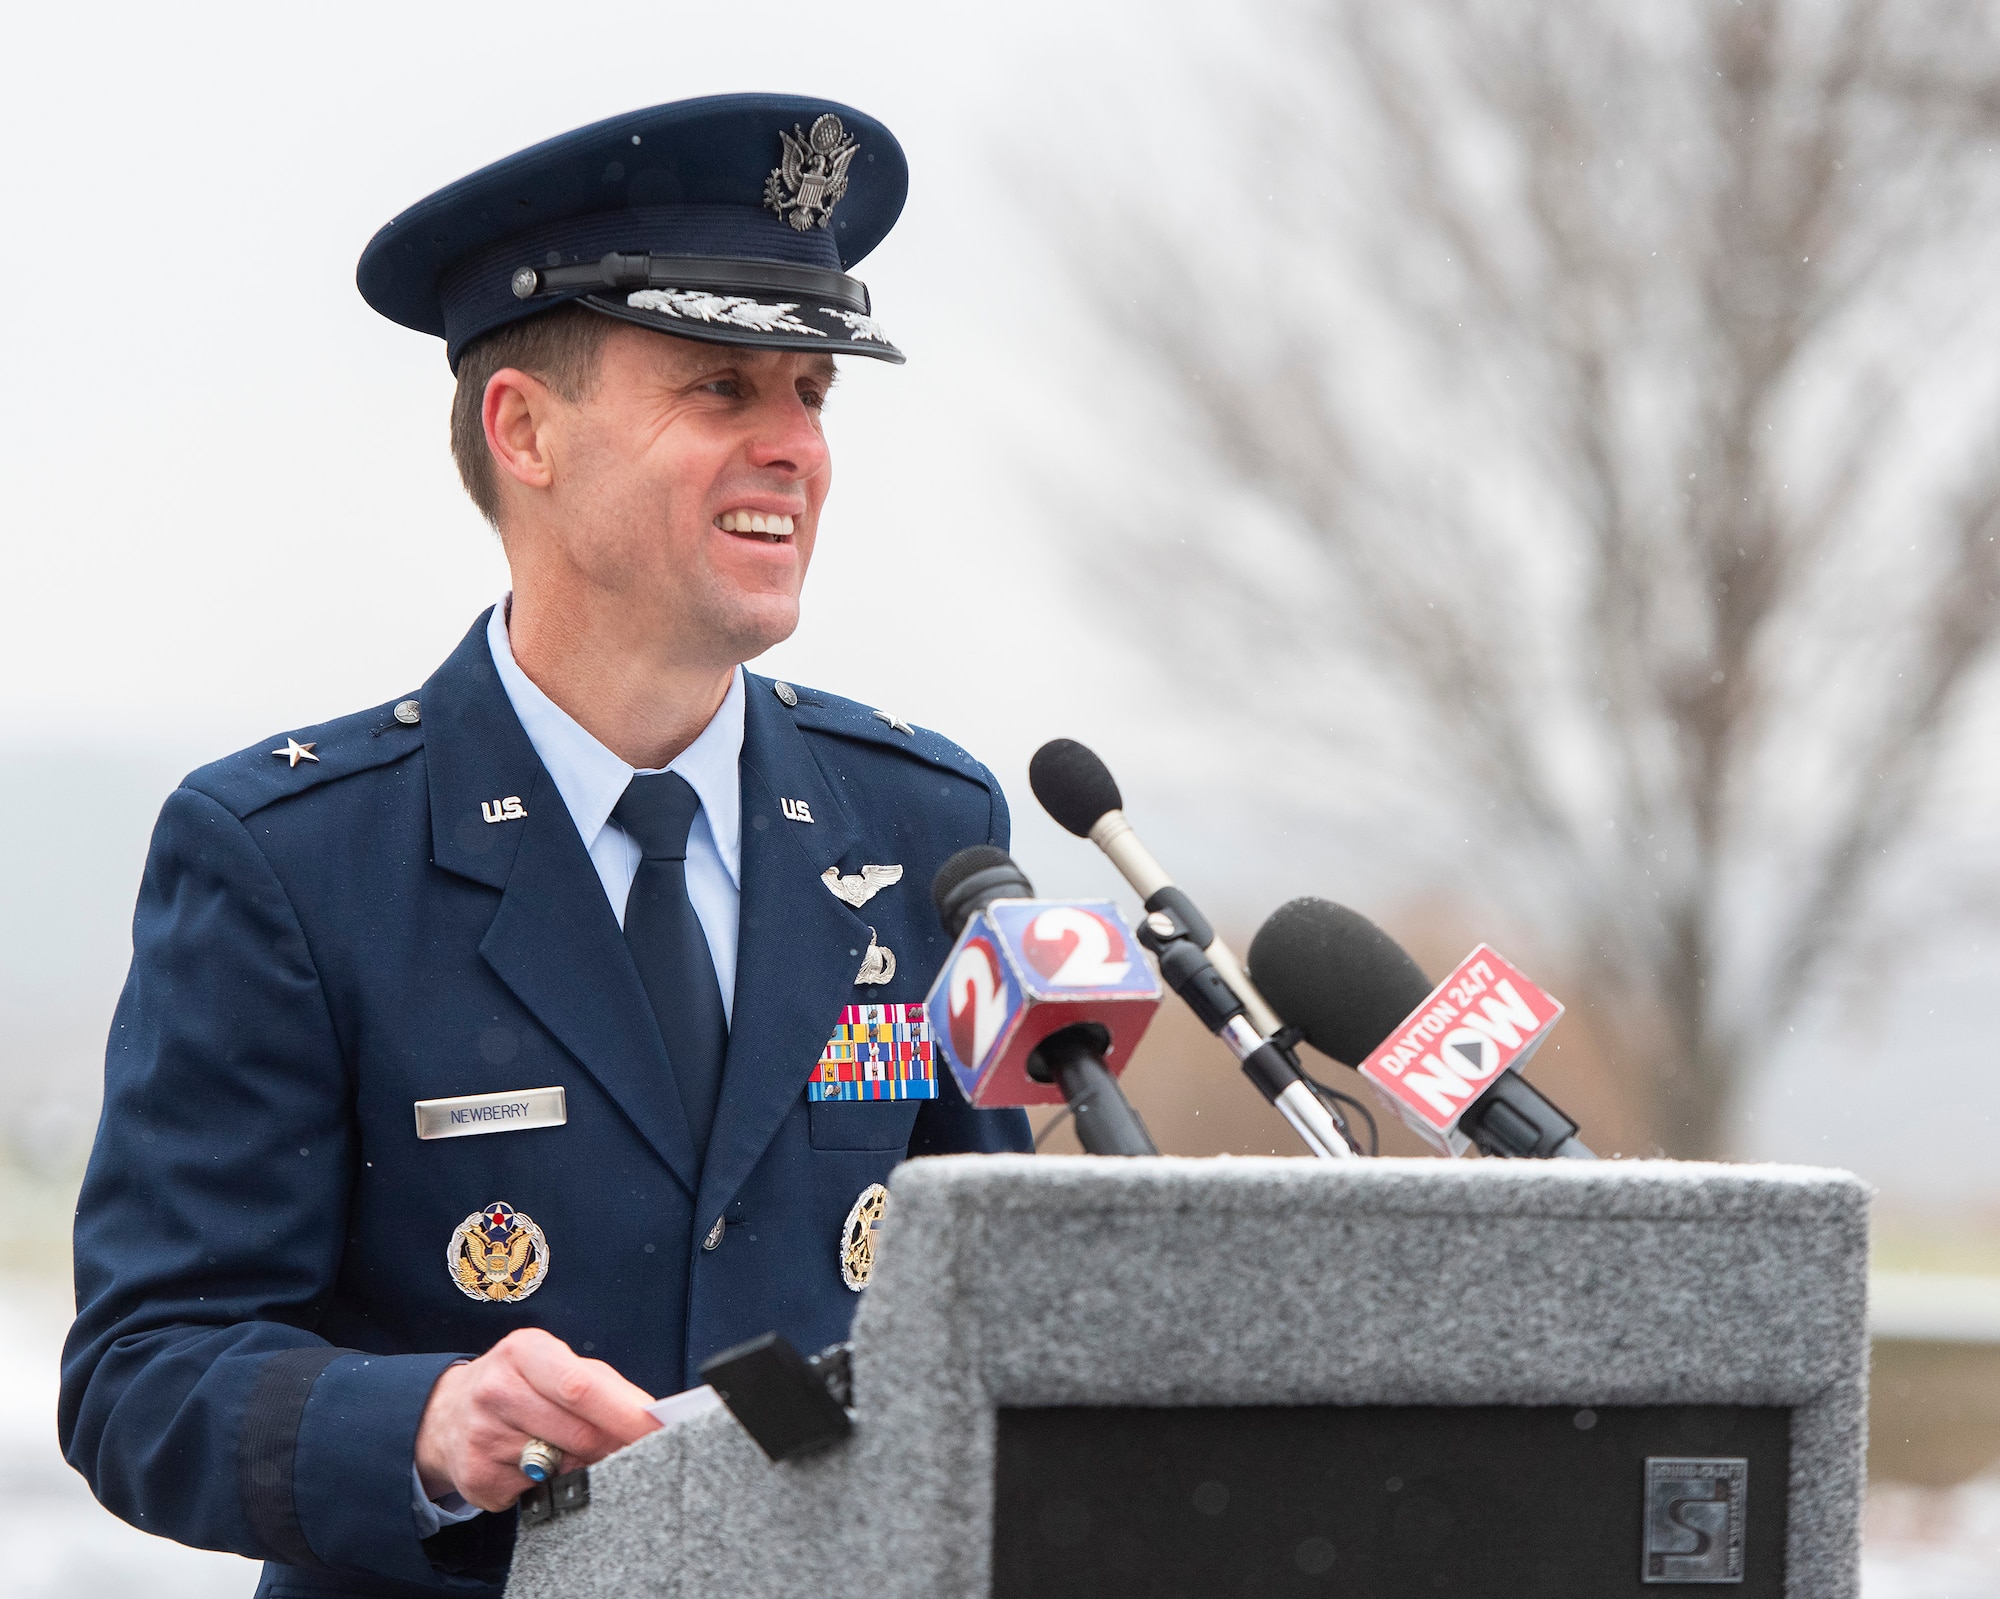 Brig. Gen. John Newberry, Air Force Life Cycle Management Center Bomber Directorate executive officer, is the guest speaker at the annual anniversary of first powered flight ceremony, Dec. 17, 2020, at the Wright Brothers Memorial on Wright-Patterson Air Force Base, Ohio. Newberry talked of how modern aircraft built on the technology developed by the Wright brothers. (U.S. Air Force photo by R.J. Oriez)